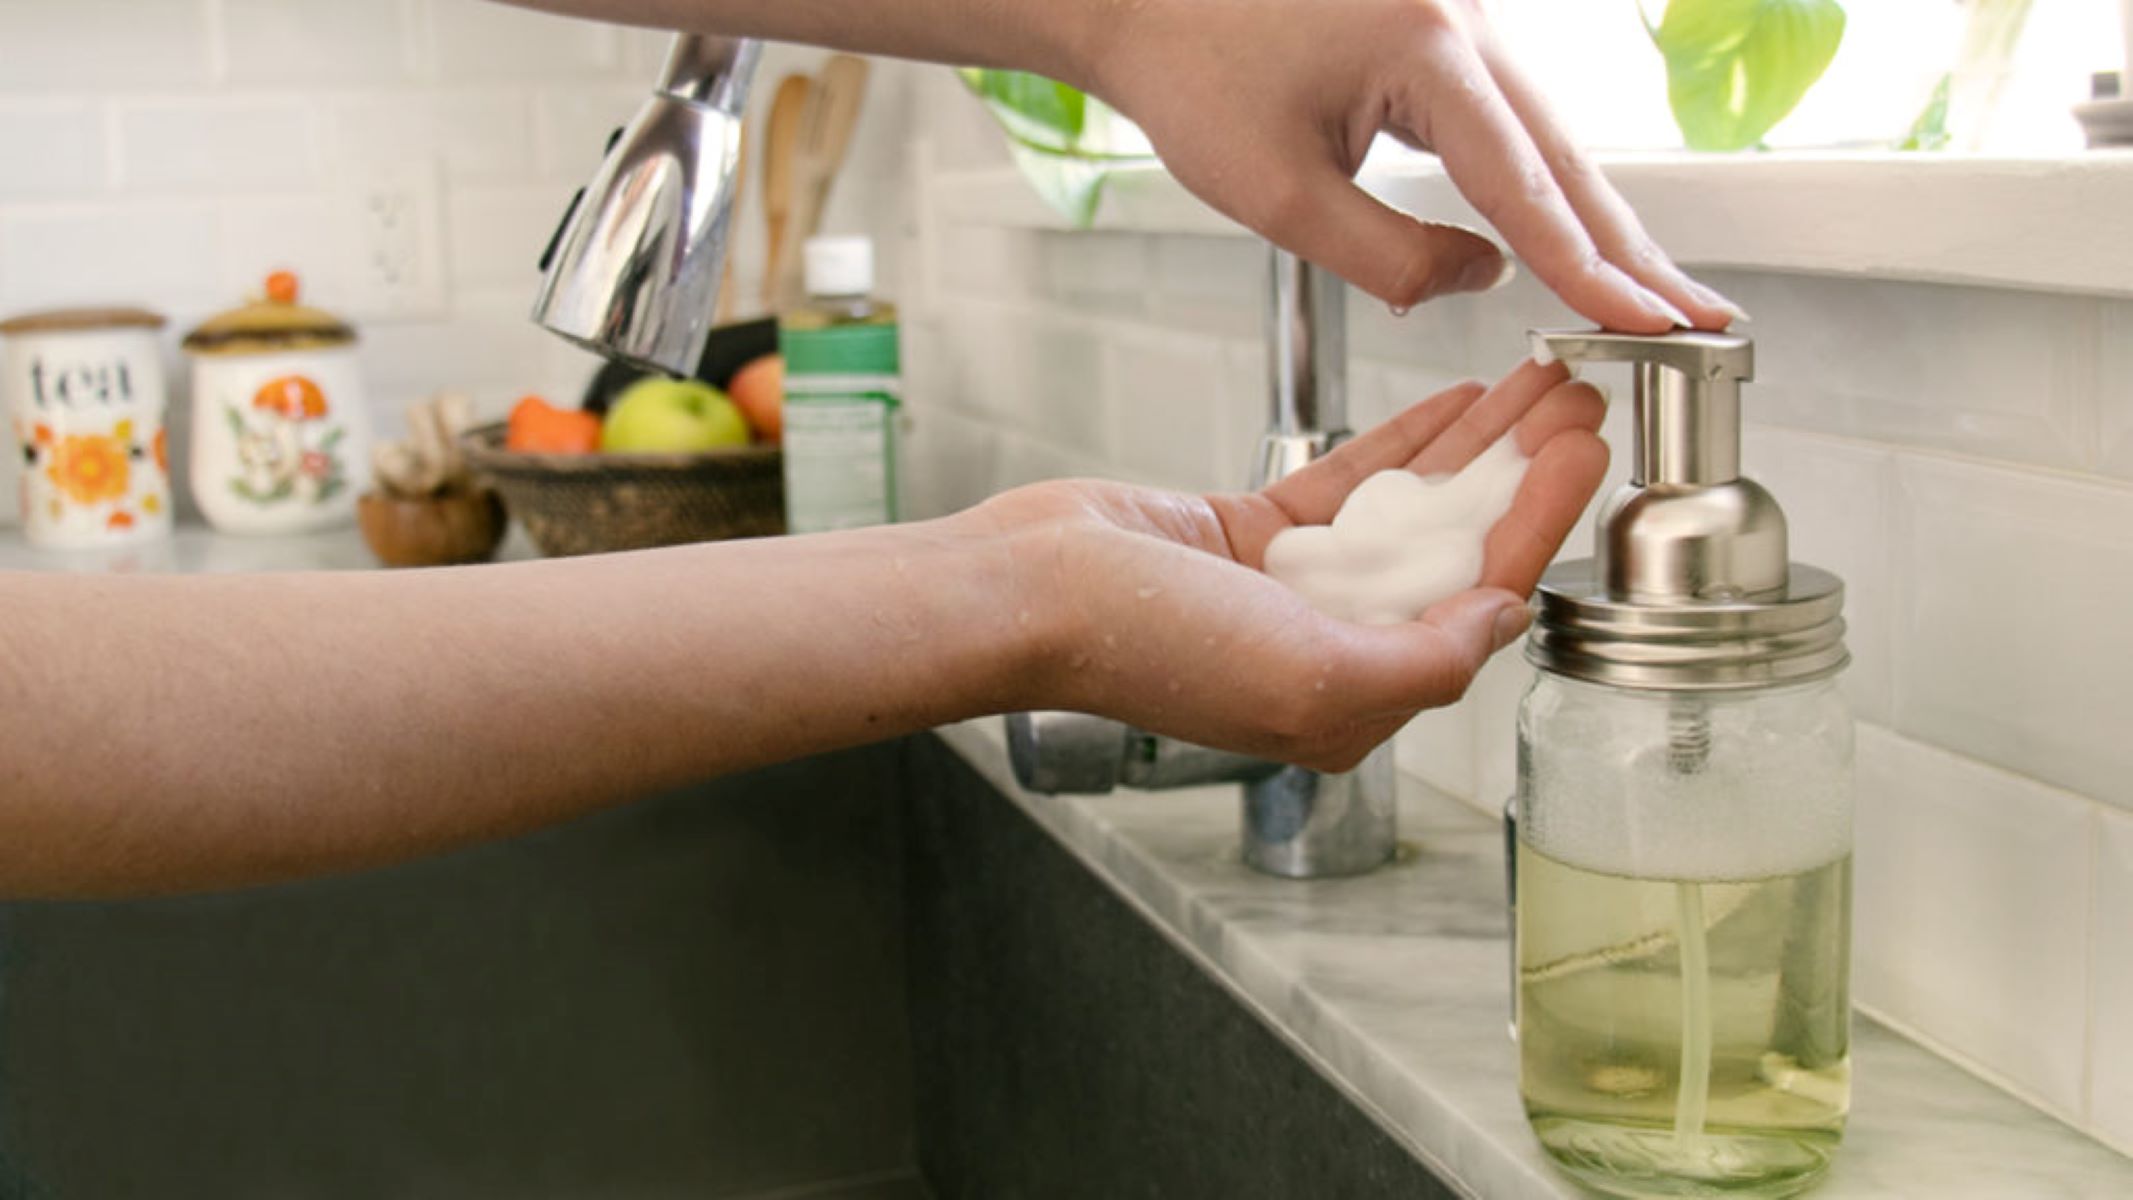 How To Make A Foaming Soap Dispenser